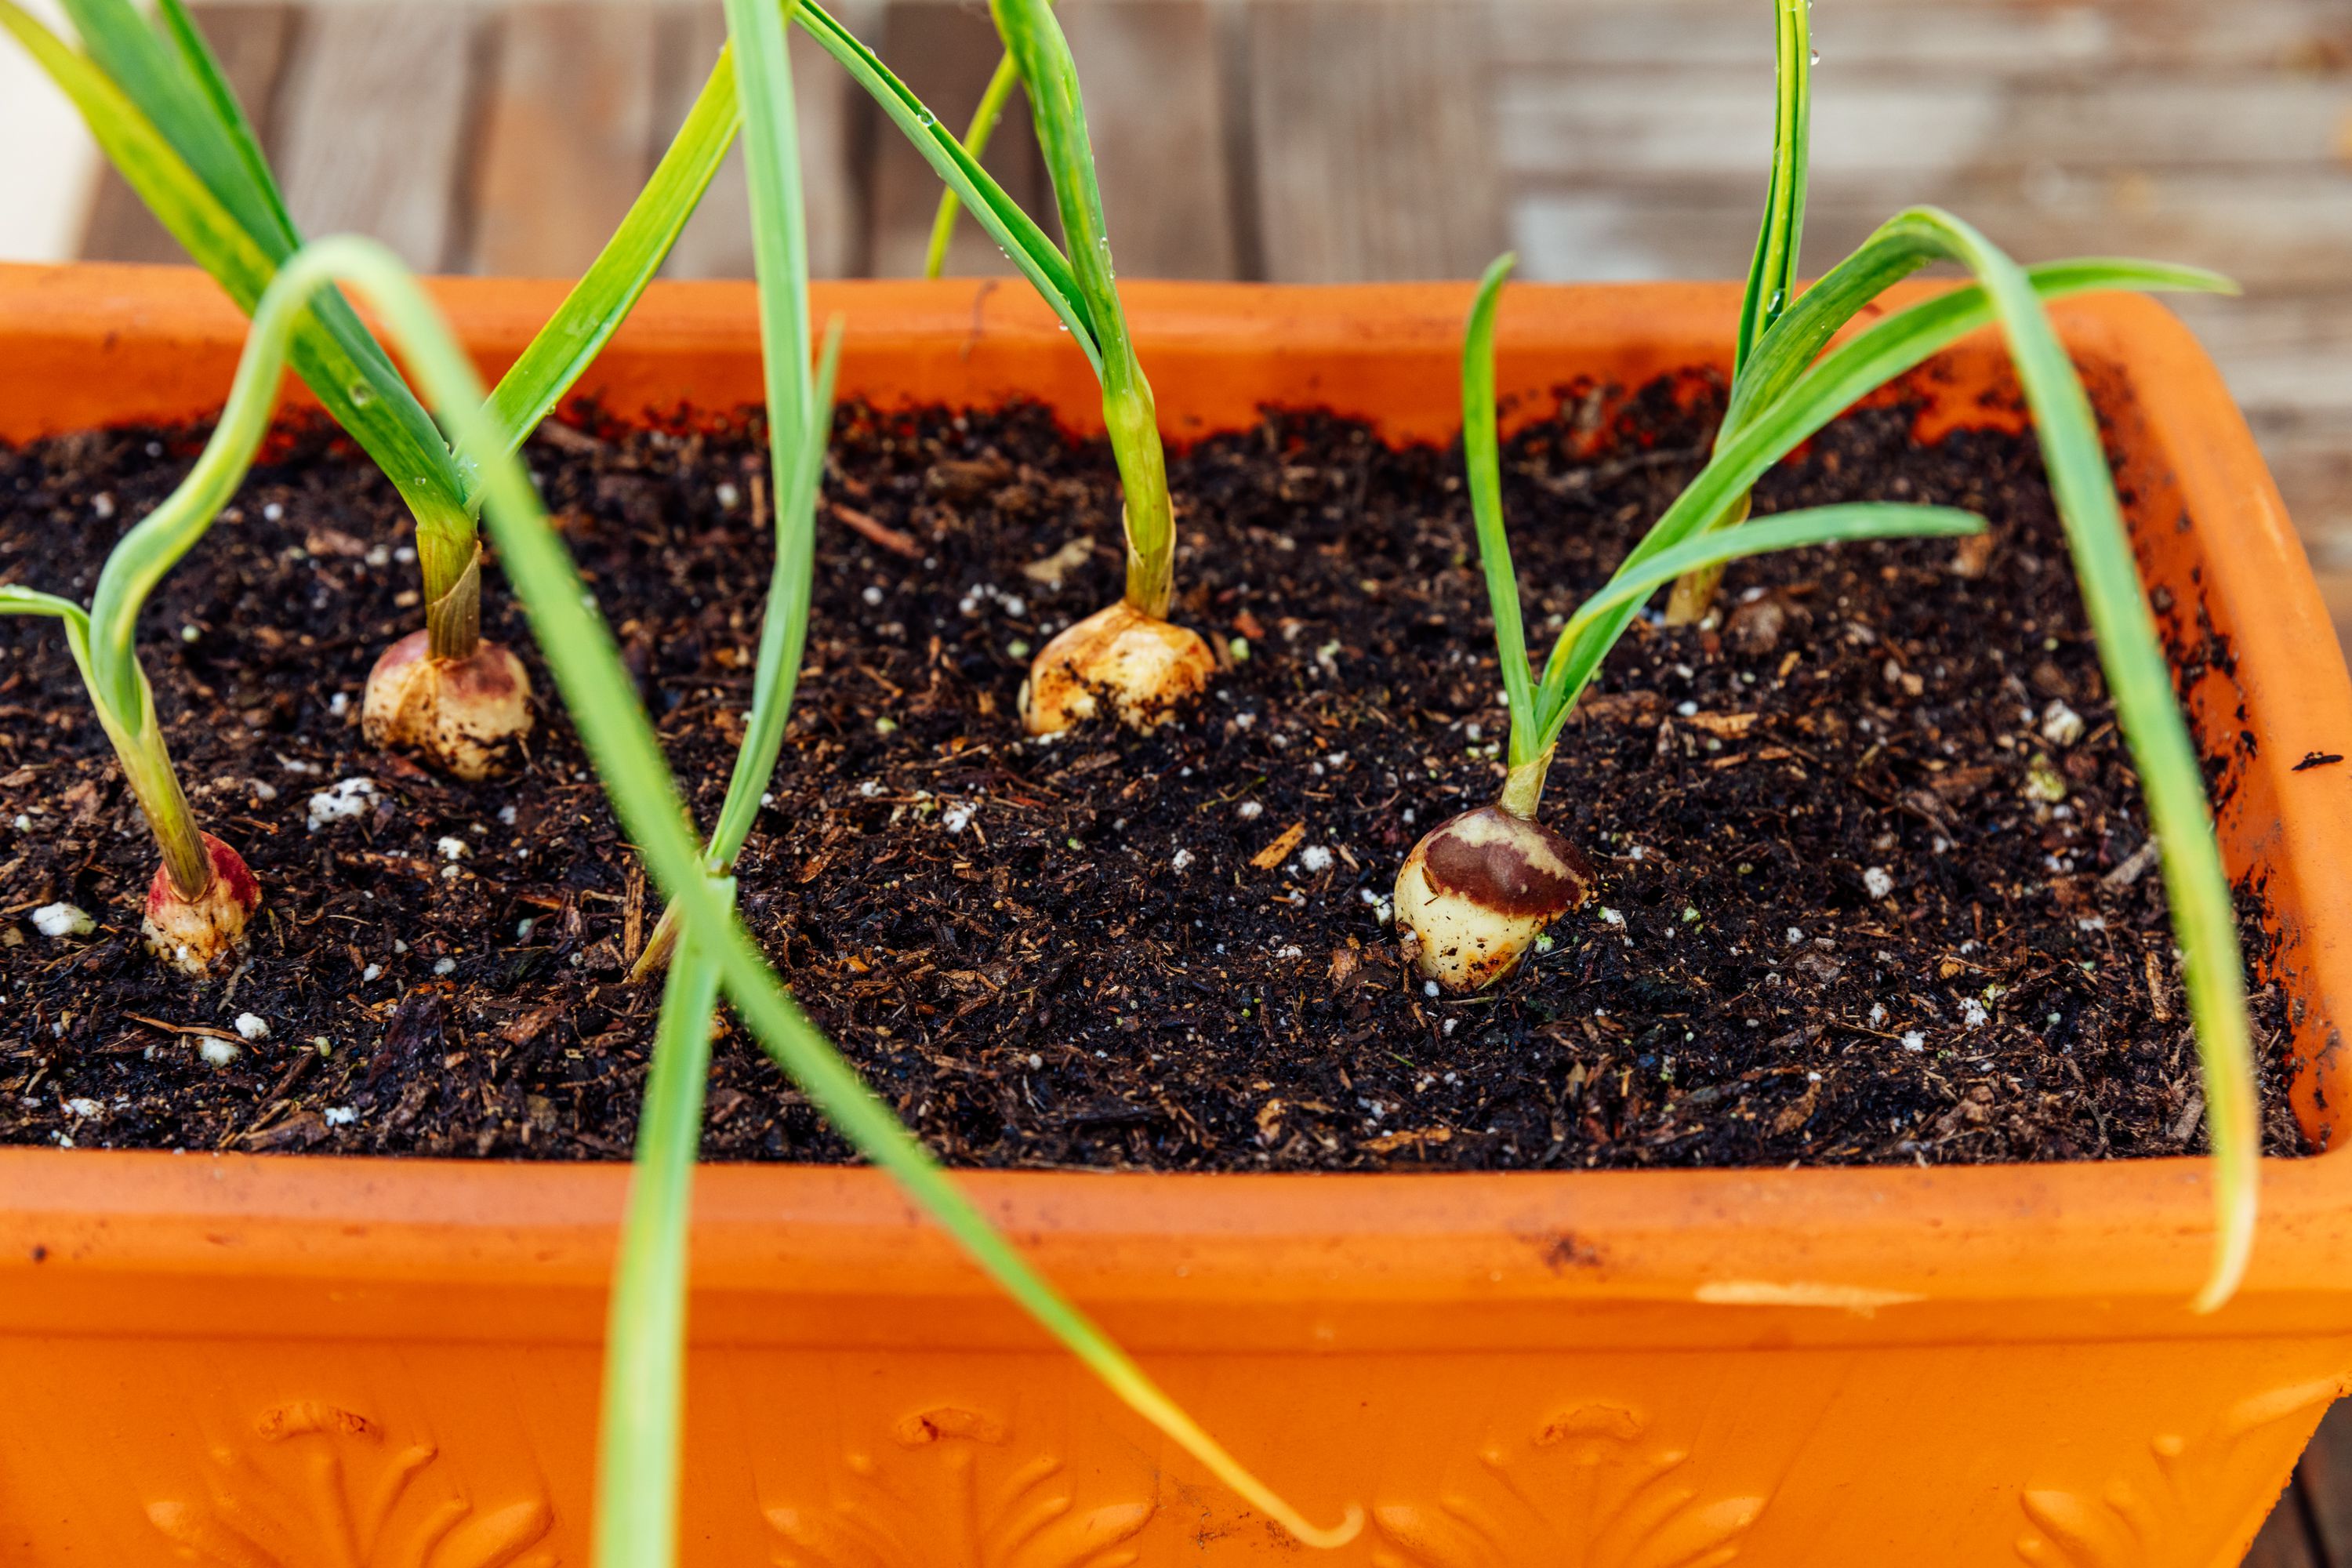 How to Grow Garlic in Containers